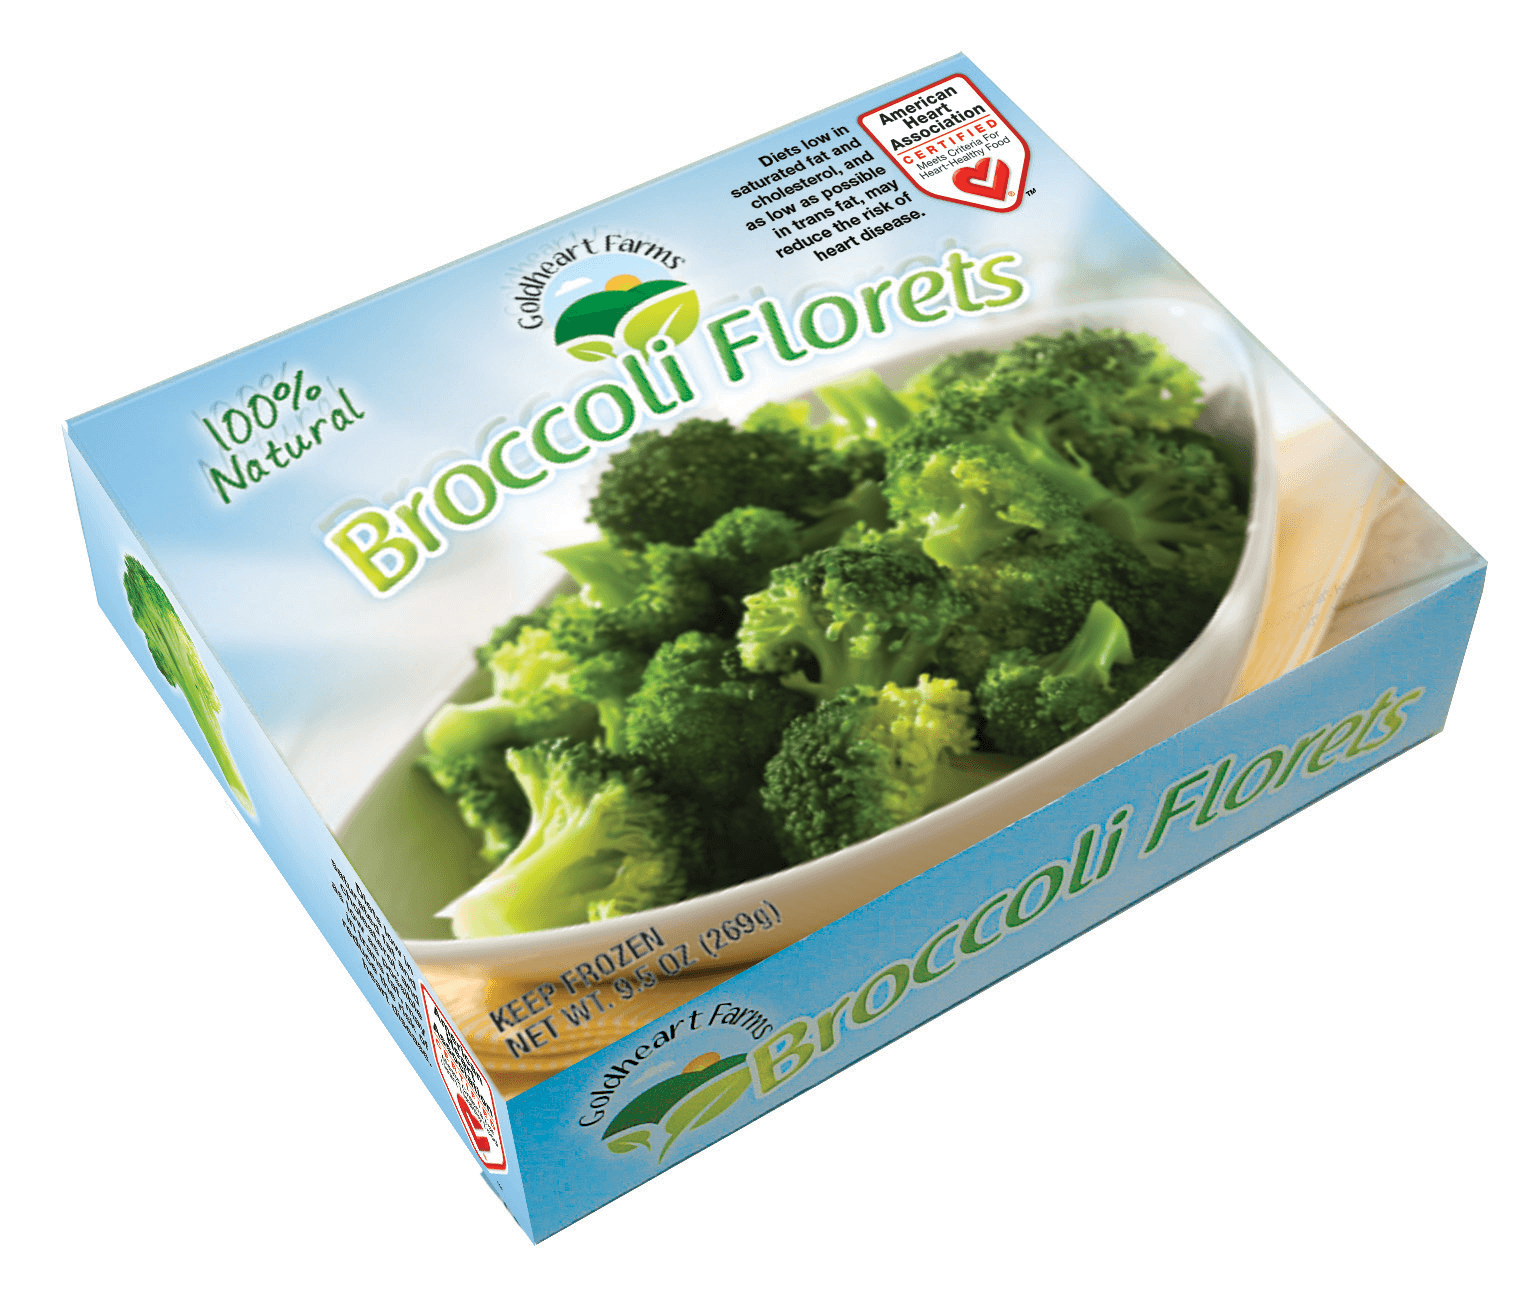 Frozen broccoli package with Heart-Check mark